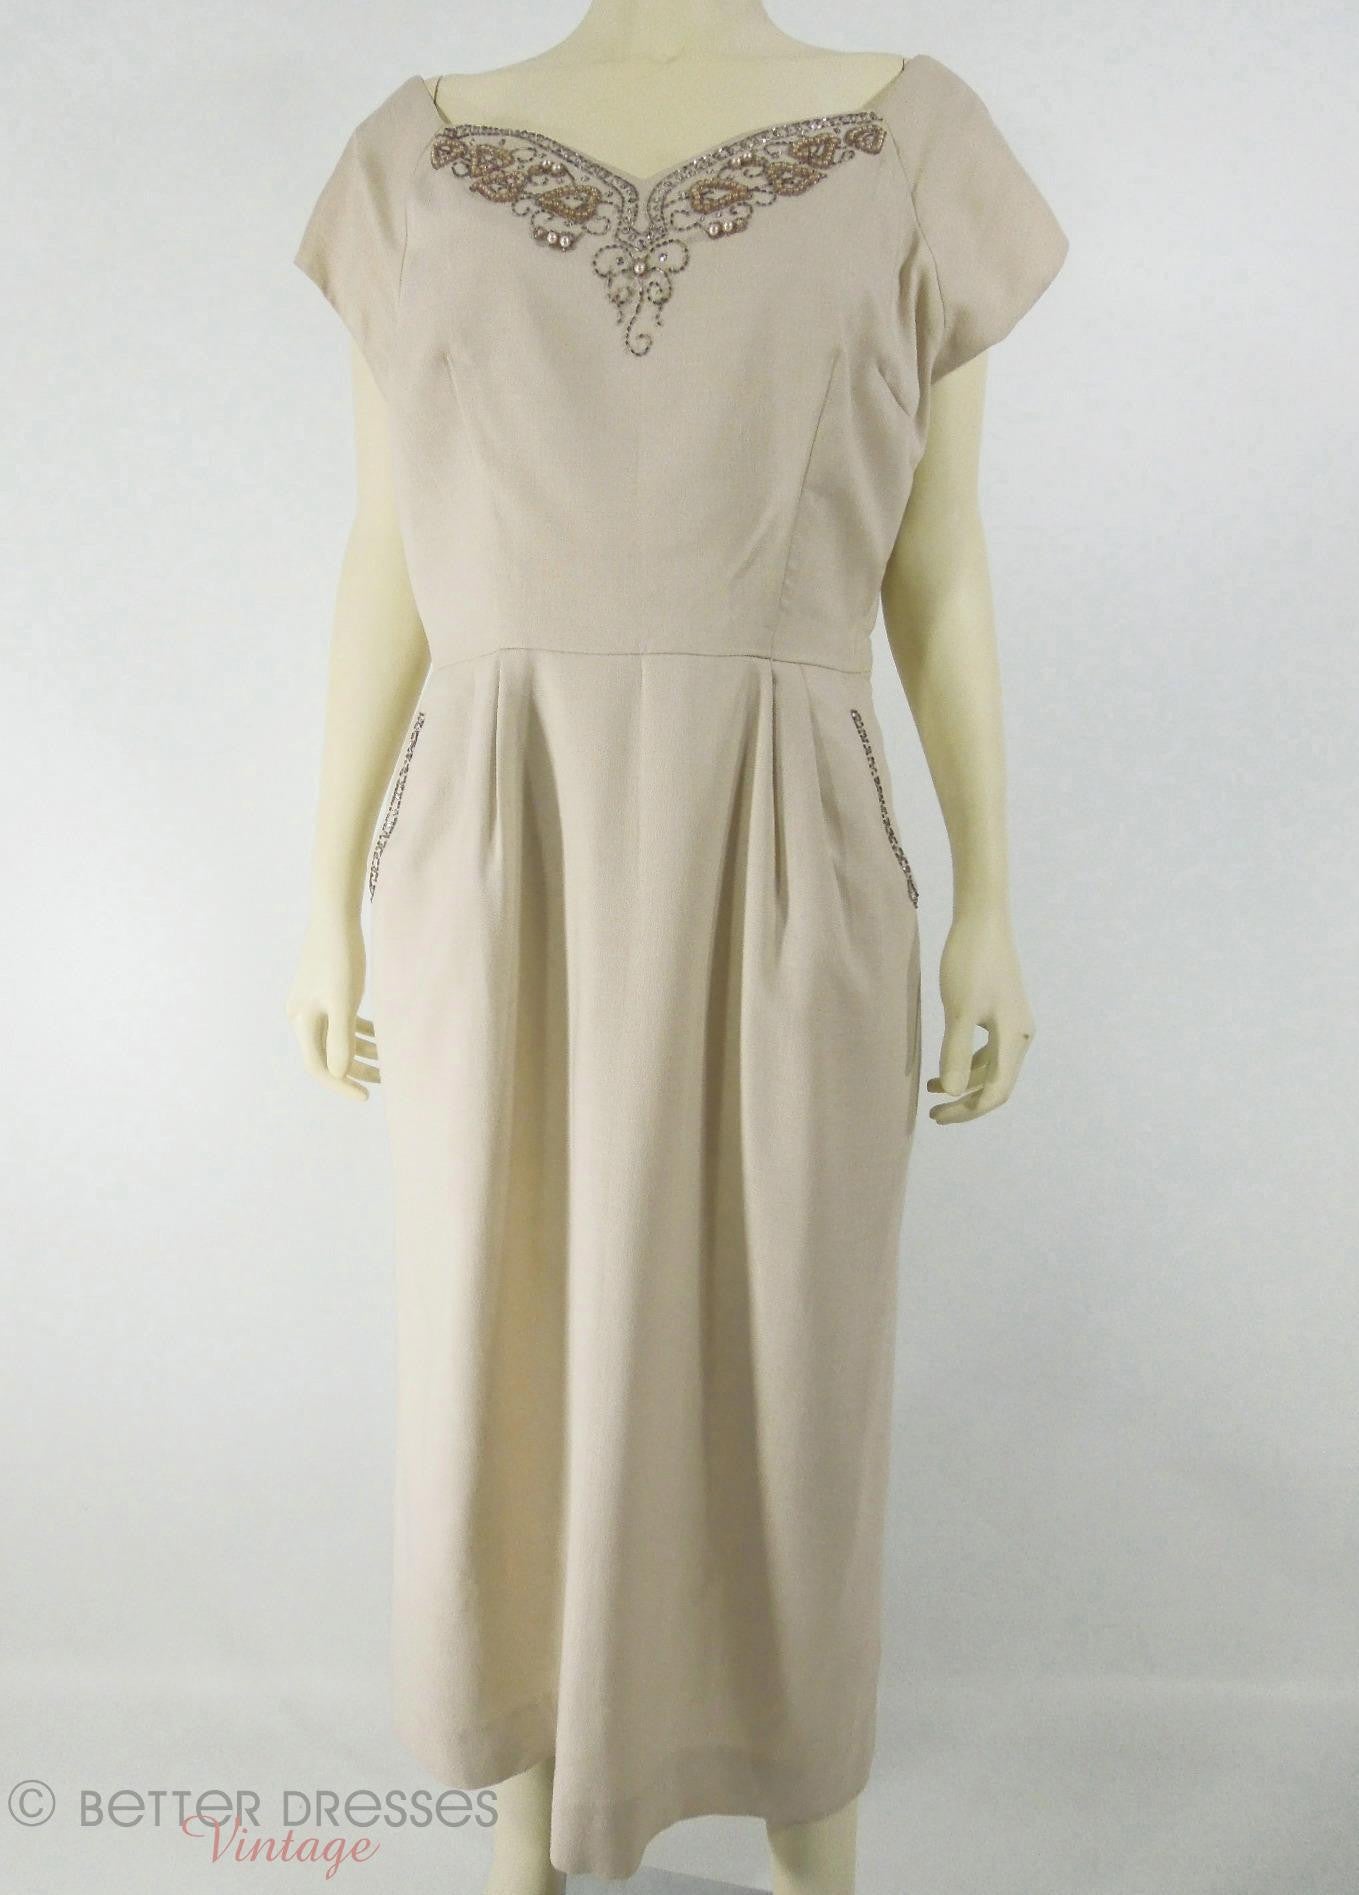 Vintage 1950s 1960s Taupe Wiggle Dress with Beading - large, plus ...